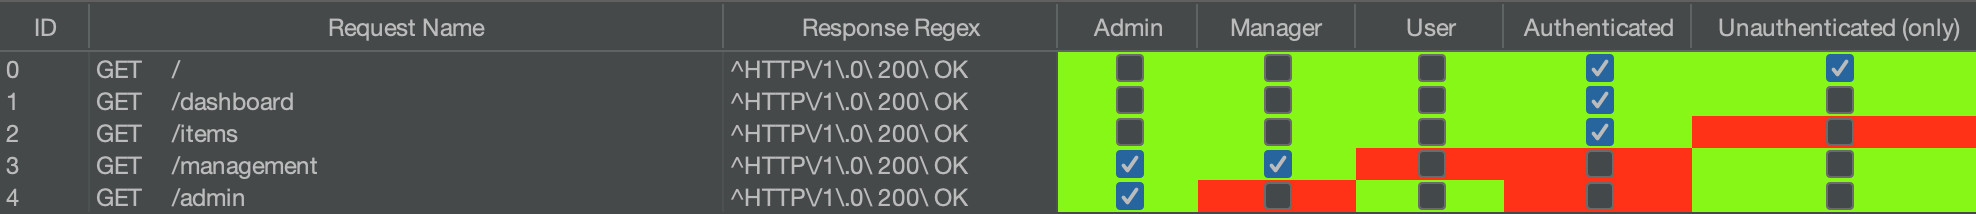 This color coded table shows cookie access results in AuthMatrix for our users.